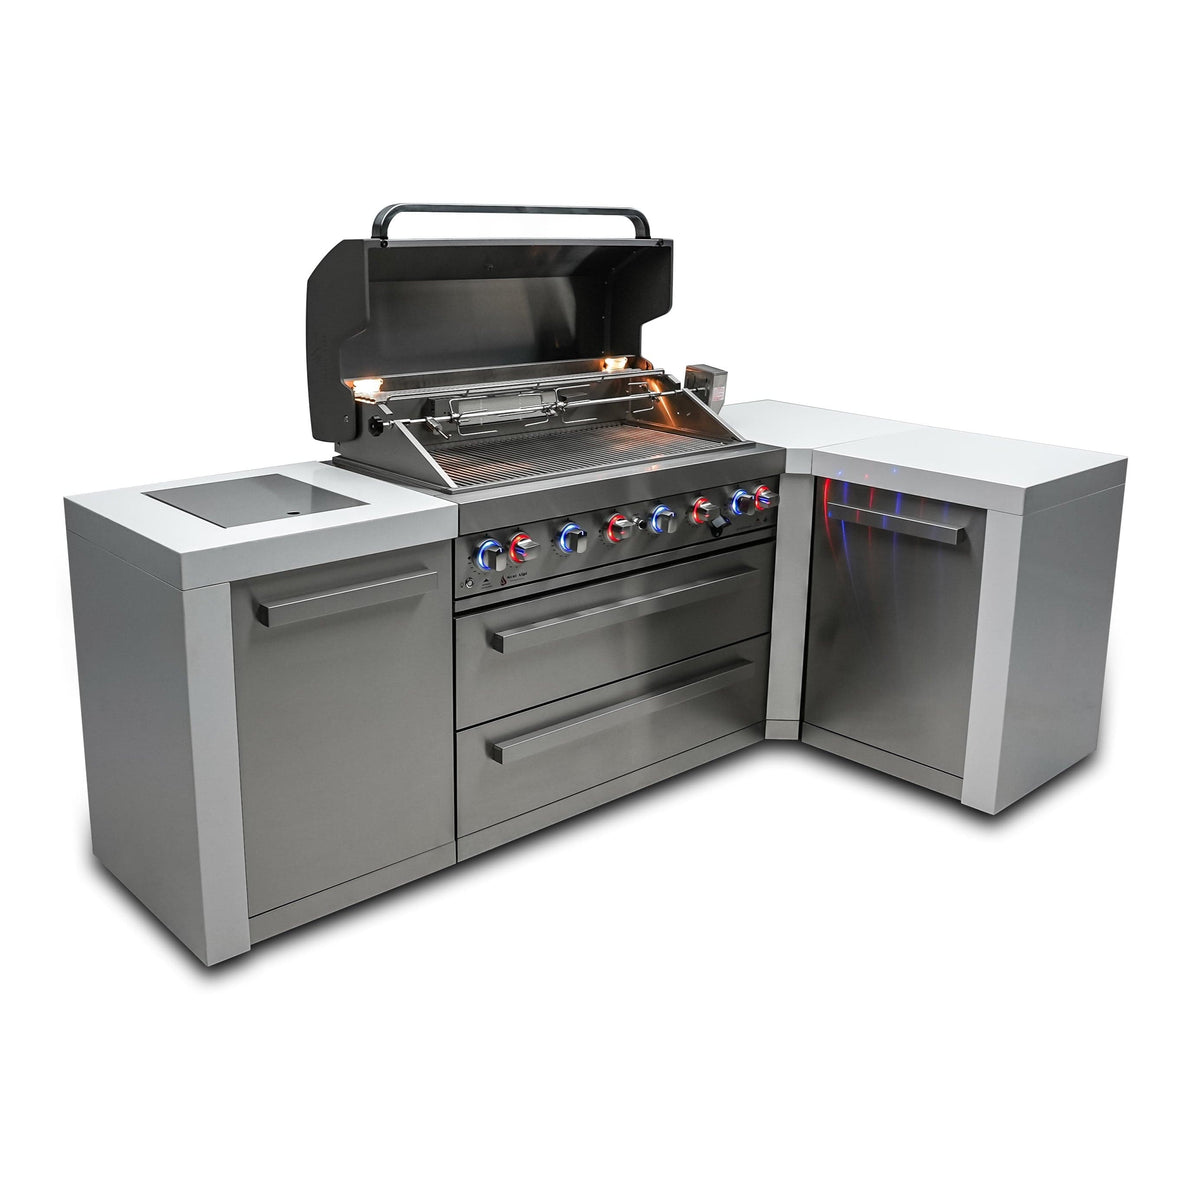 Mont Alpi Islands Mont Alpi 805 Deluxe Island with 90 Degree Corner / 6-Burner Grill, 2 Infrared Burners, Stainless Steel / MAi805-D90C